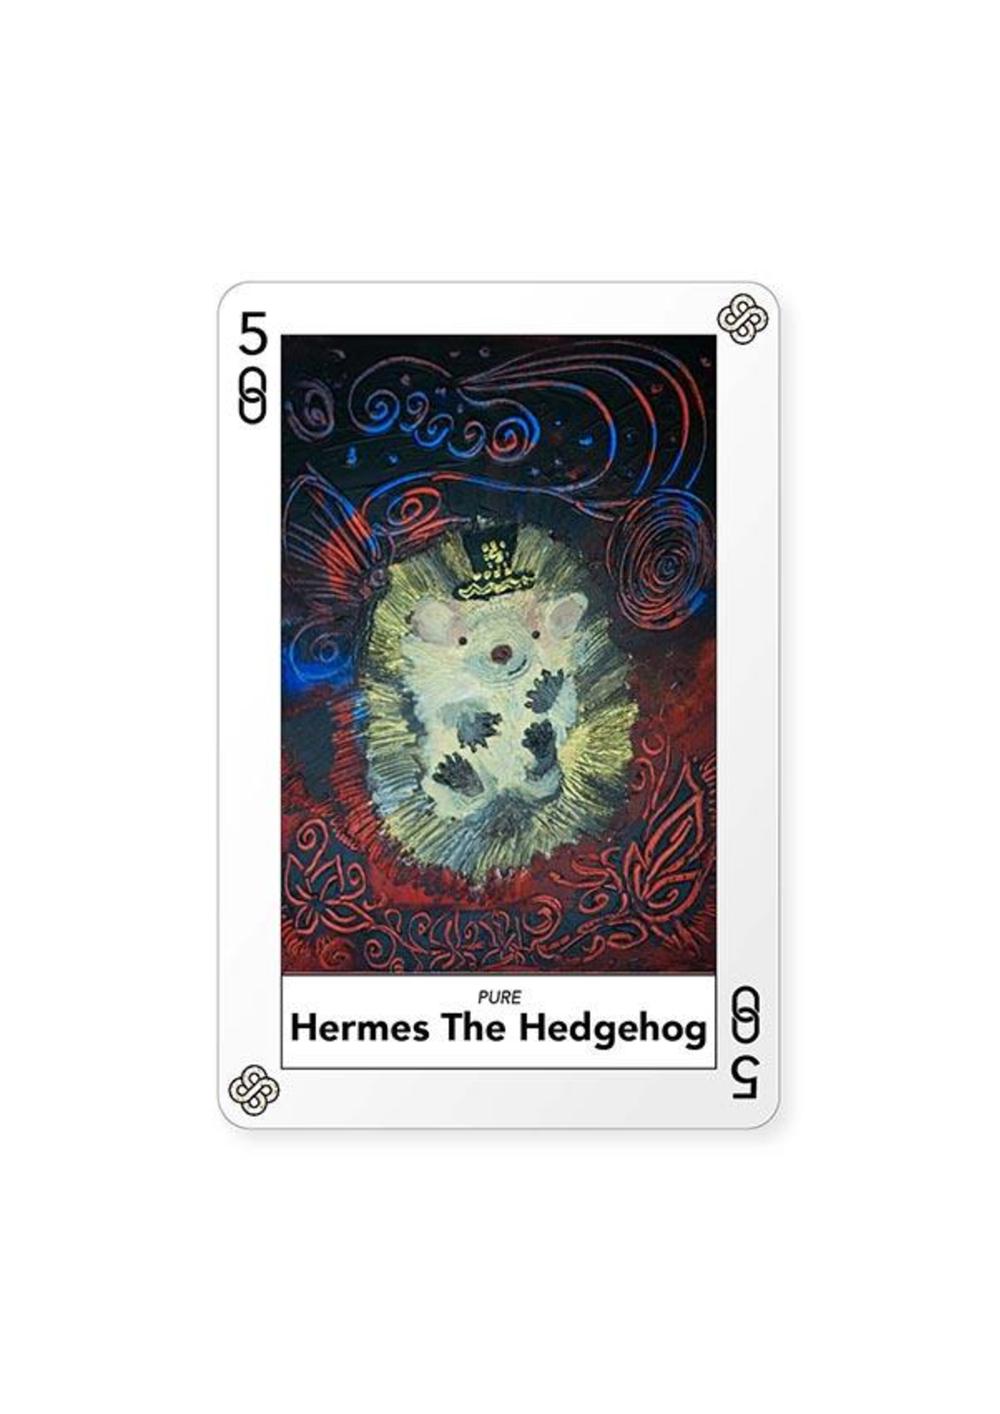 Certificate of Authenticity and Consignment - Hermes The Hedgehog